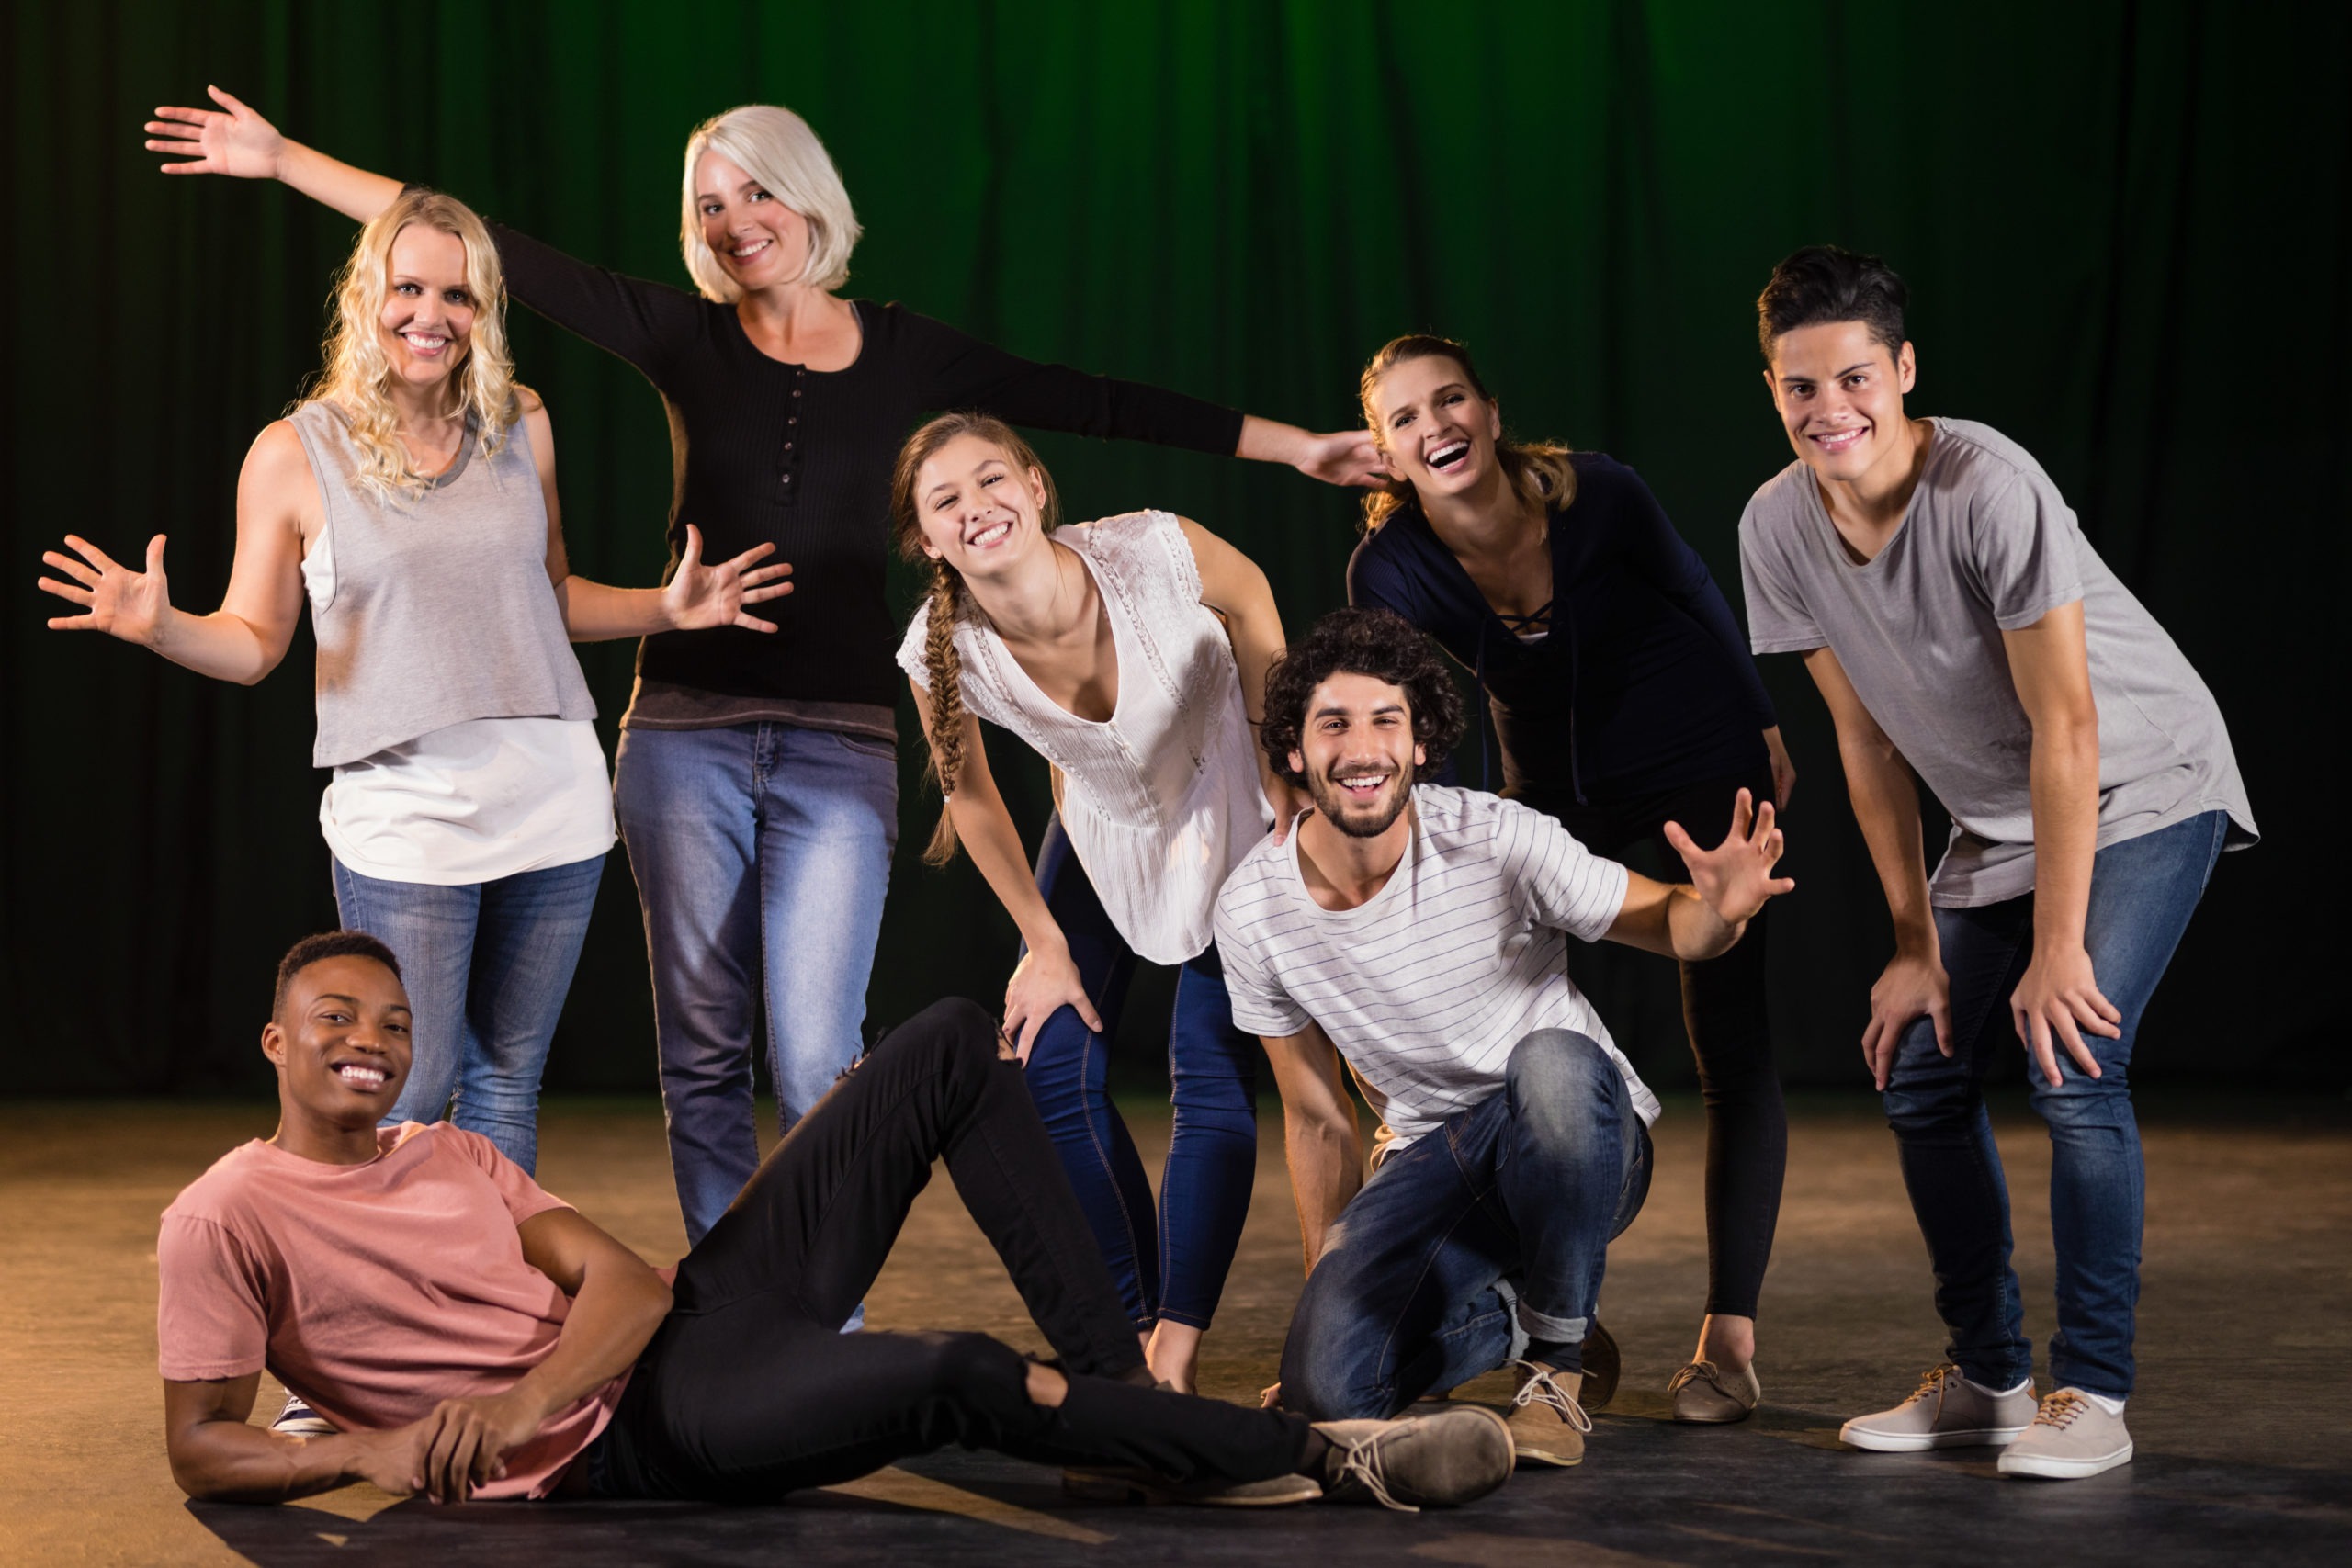 Actors practicing play on stage. A group of people are posing for a picture